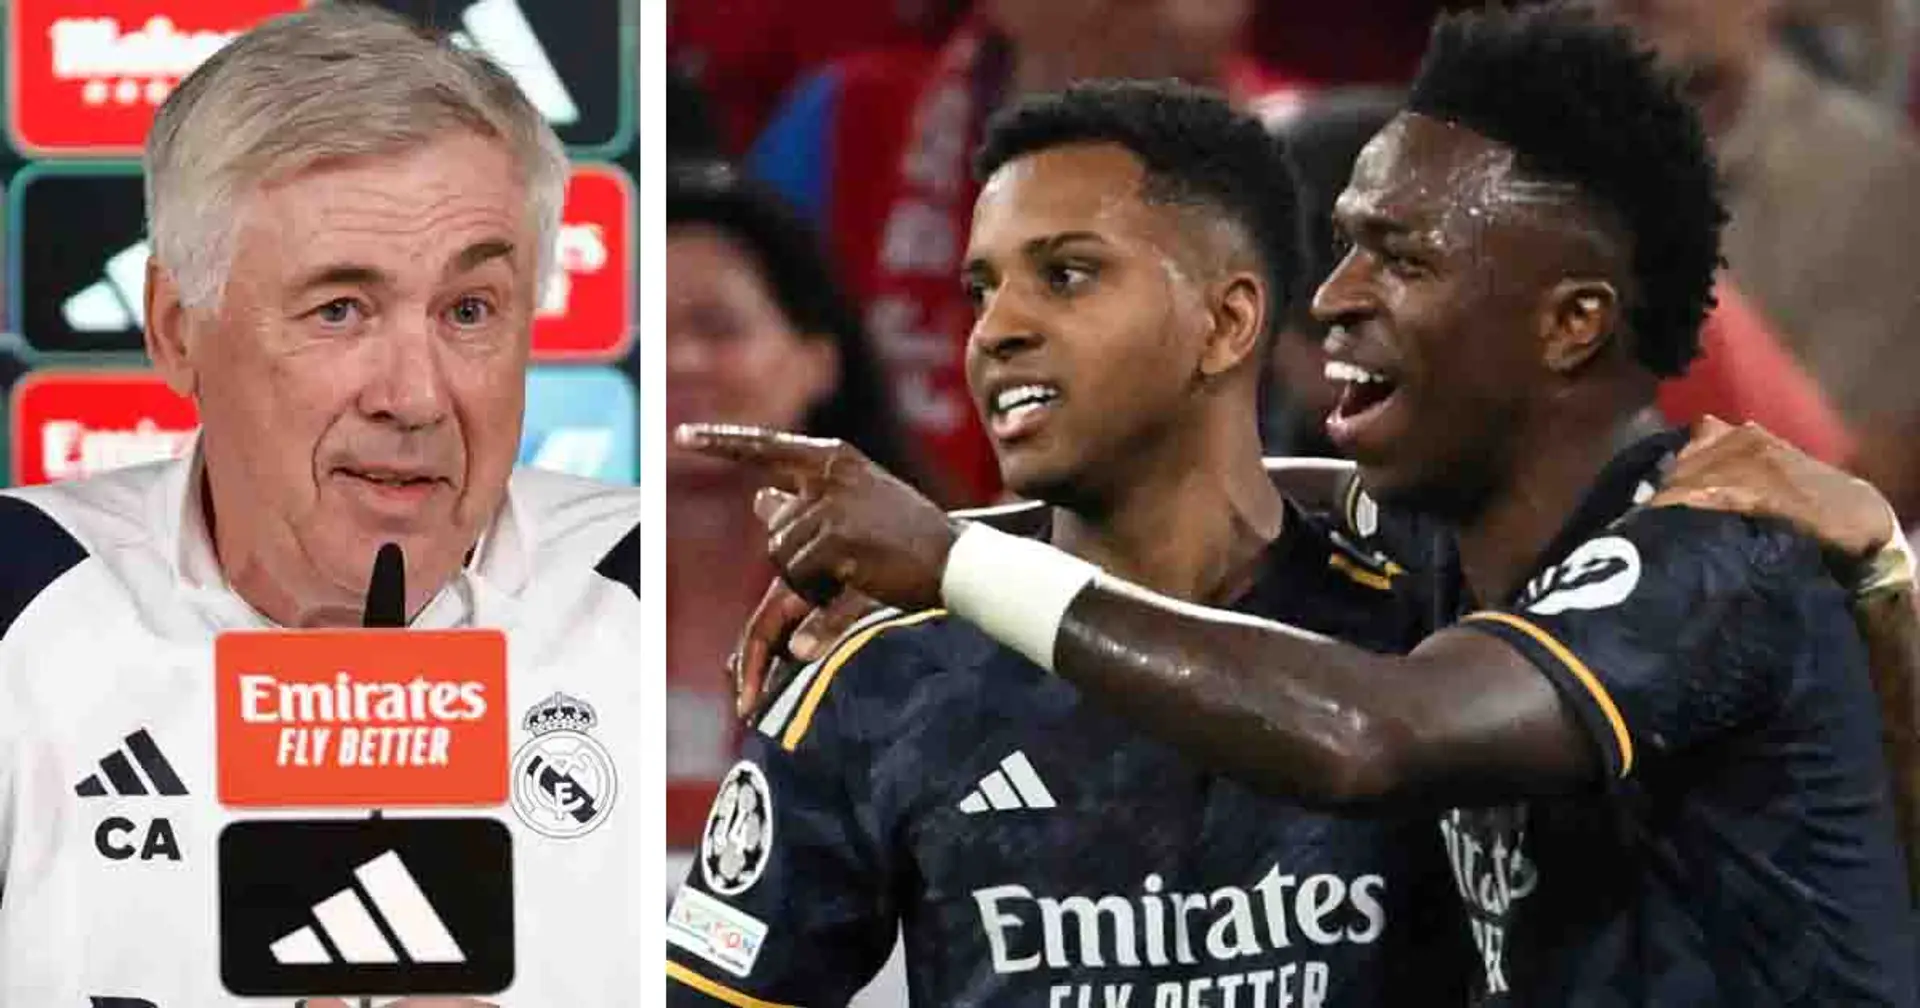 'Placing Rodrygo on the left is not defensive': Ancelotti explains recent changes to Real Madrid's frontline